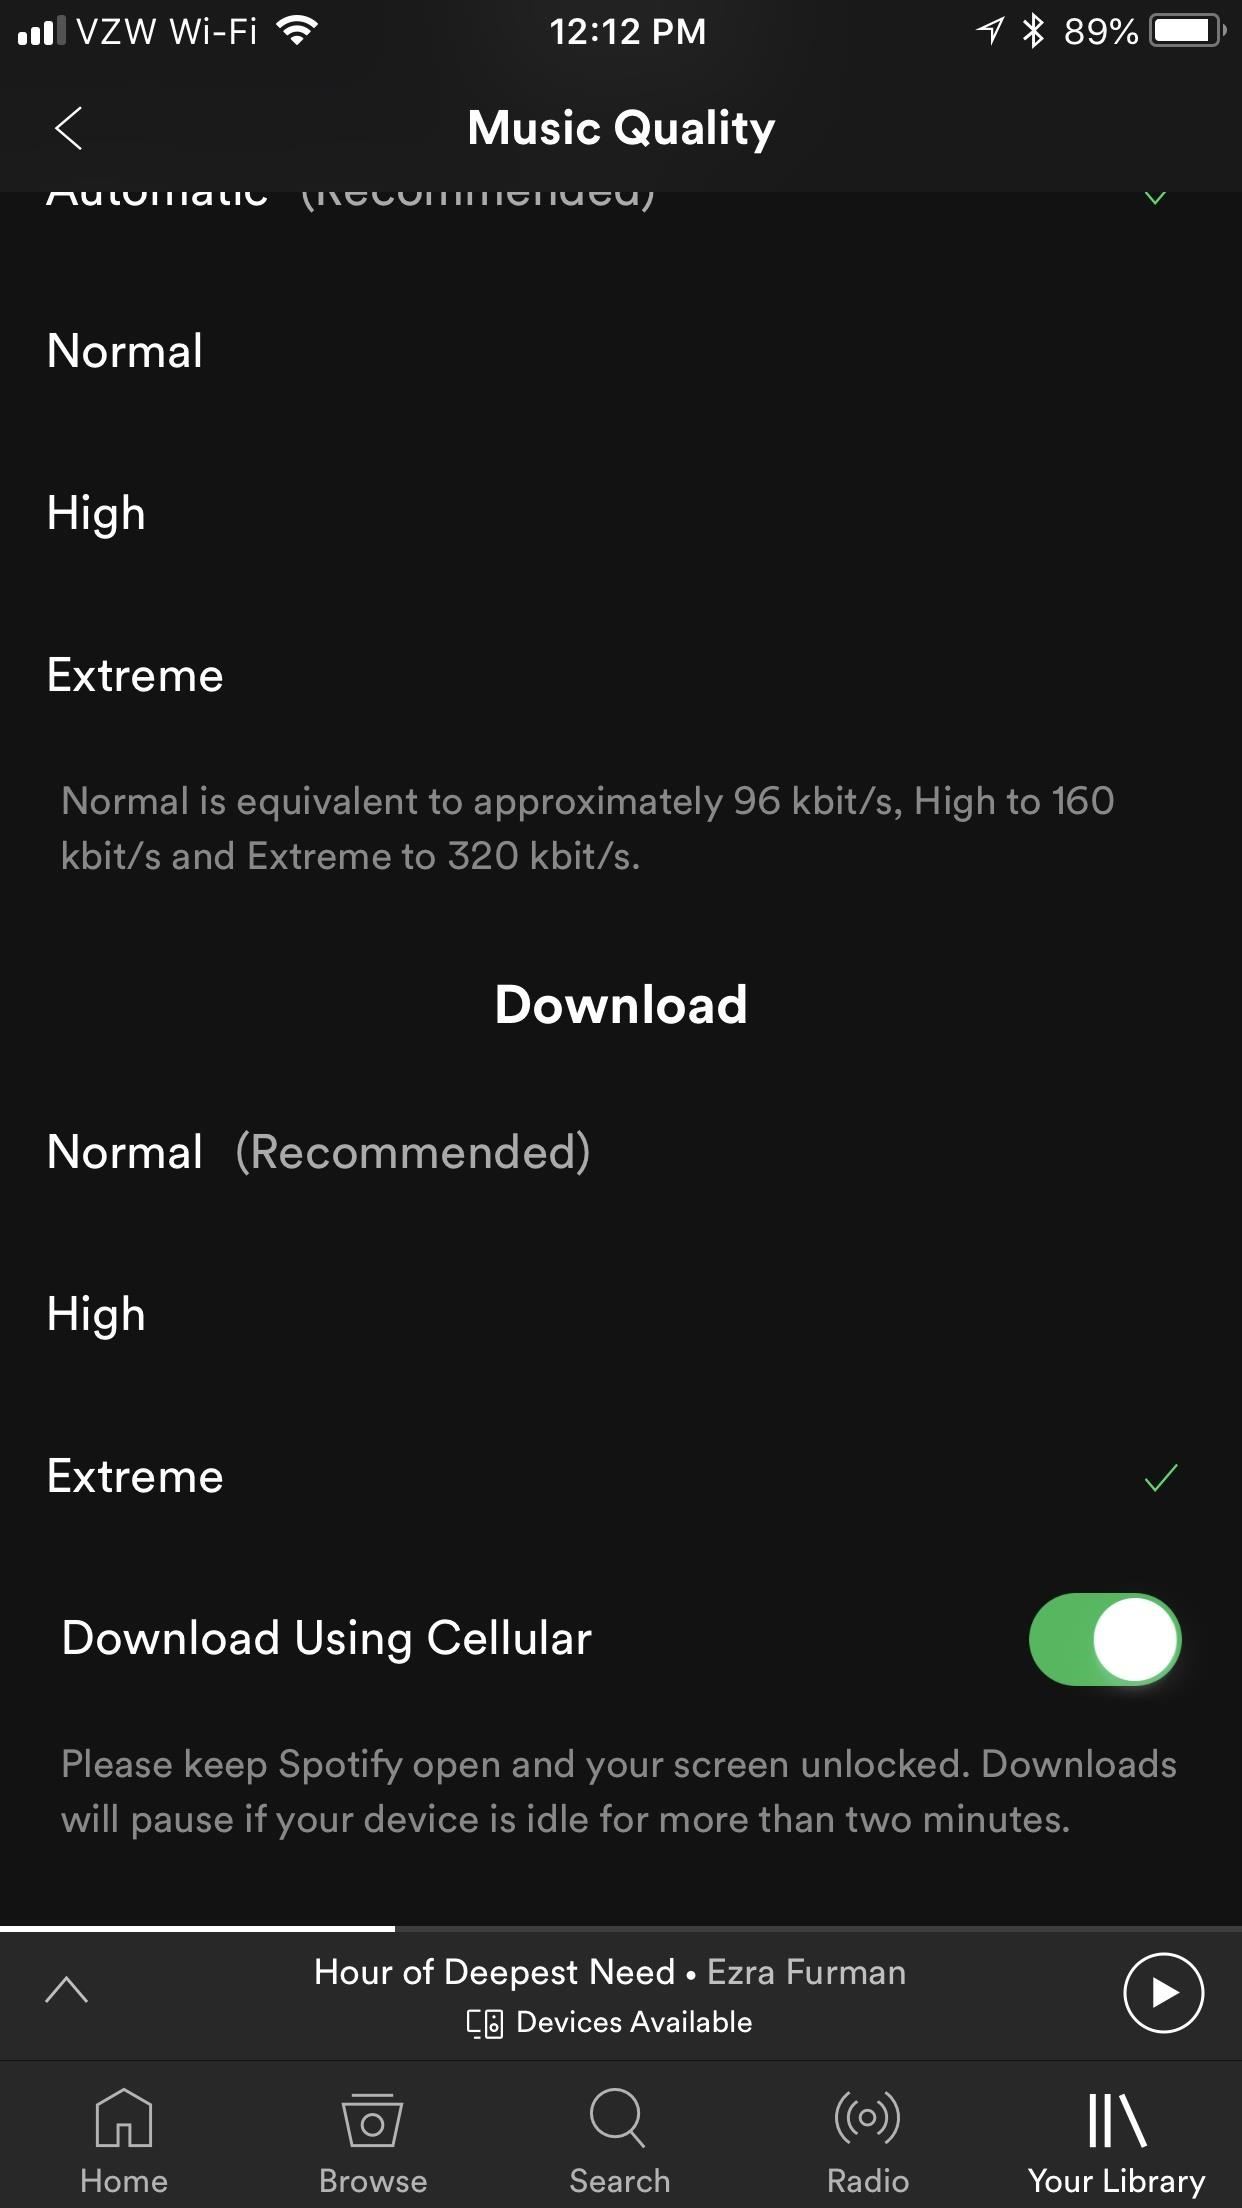 Do you need wifi to download spotify songs